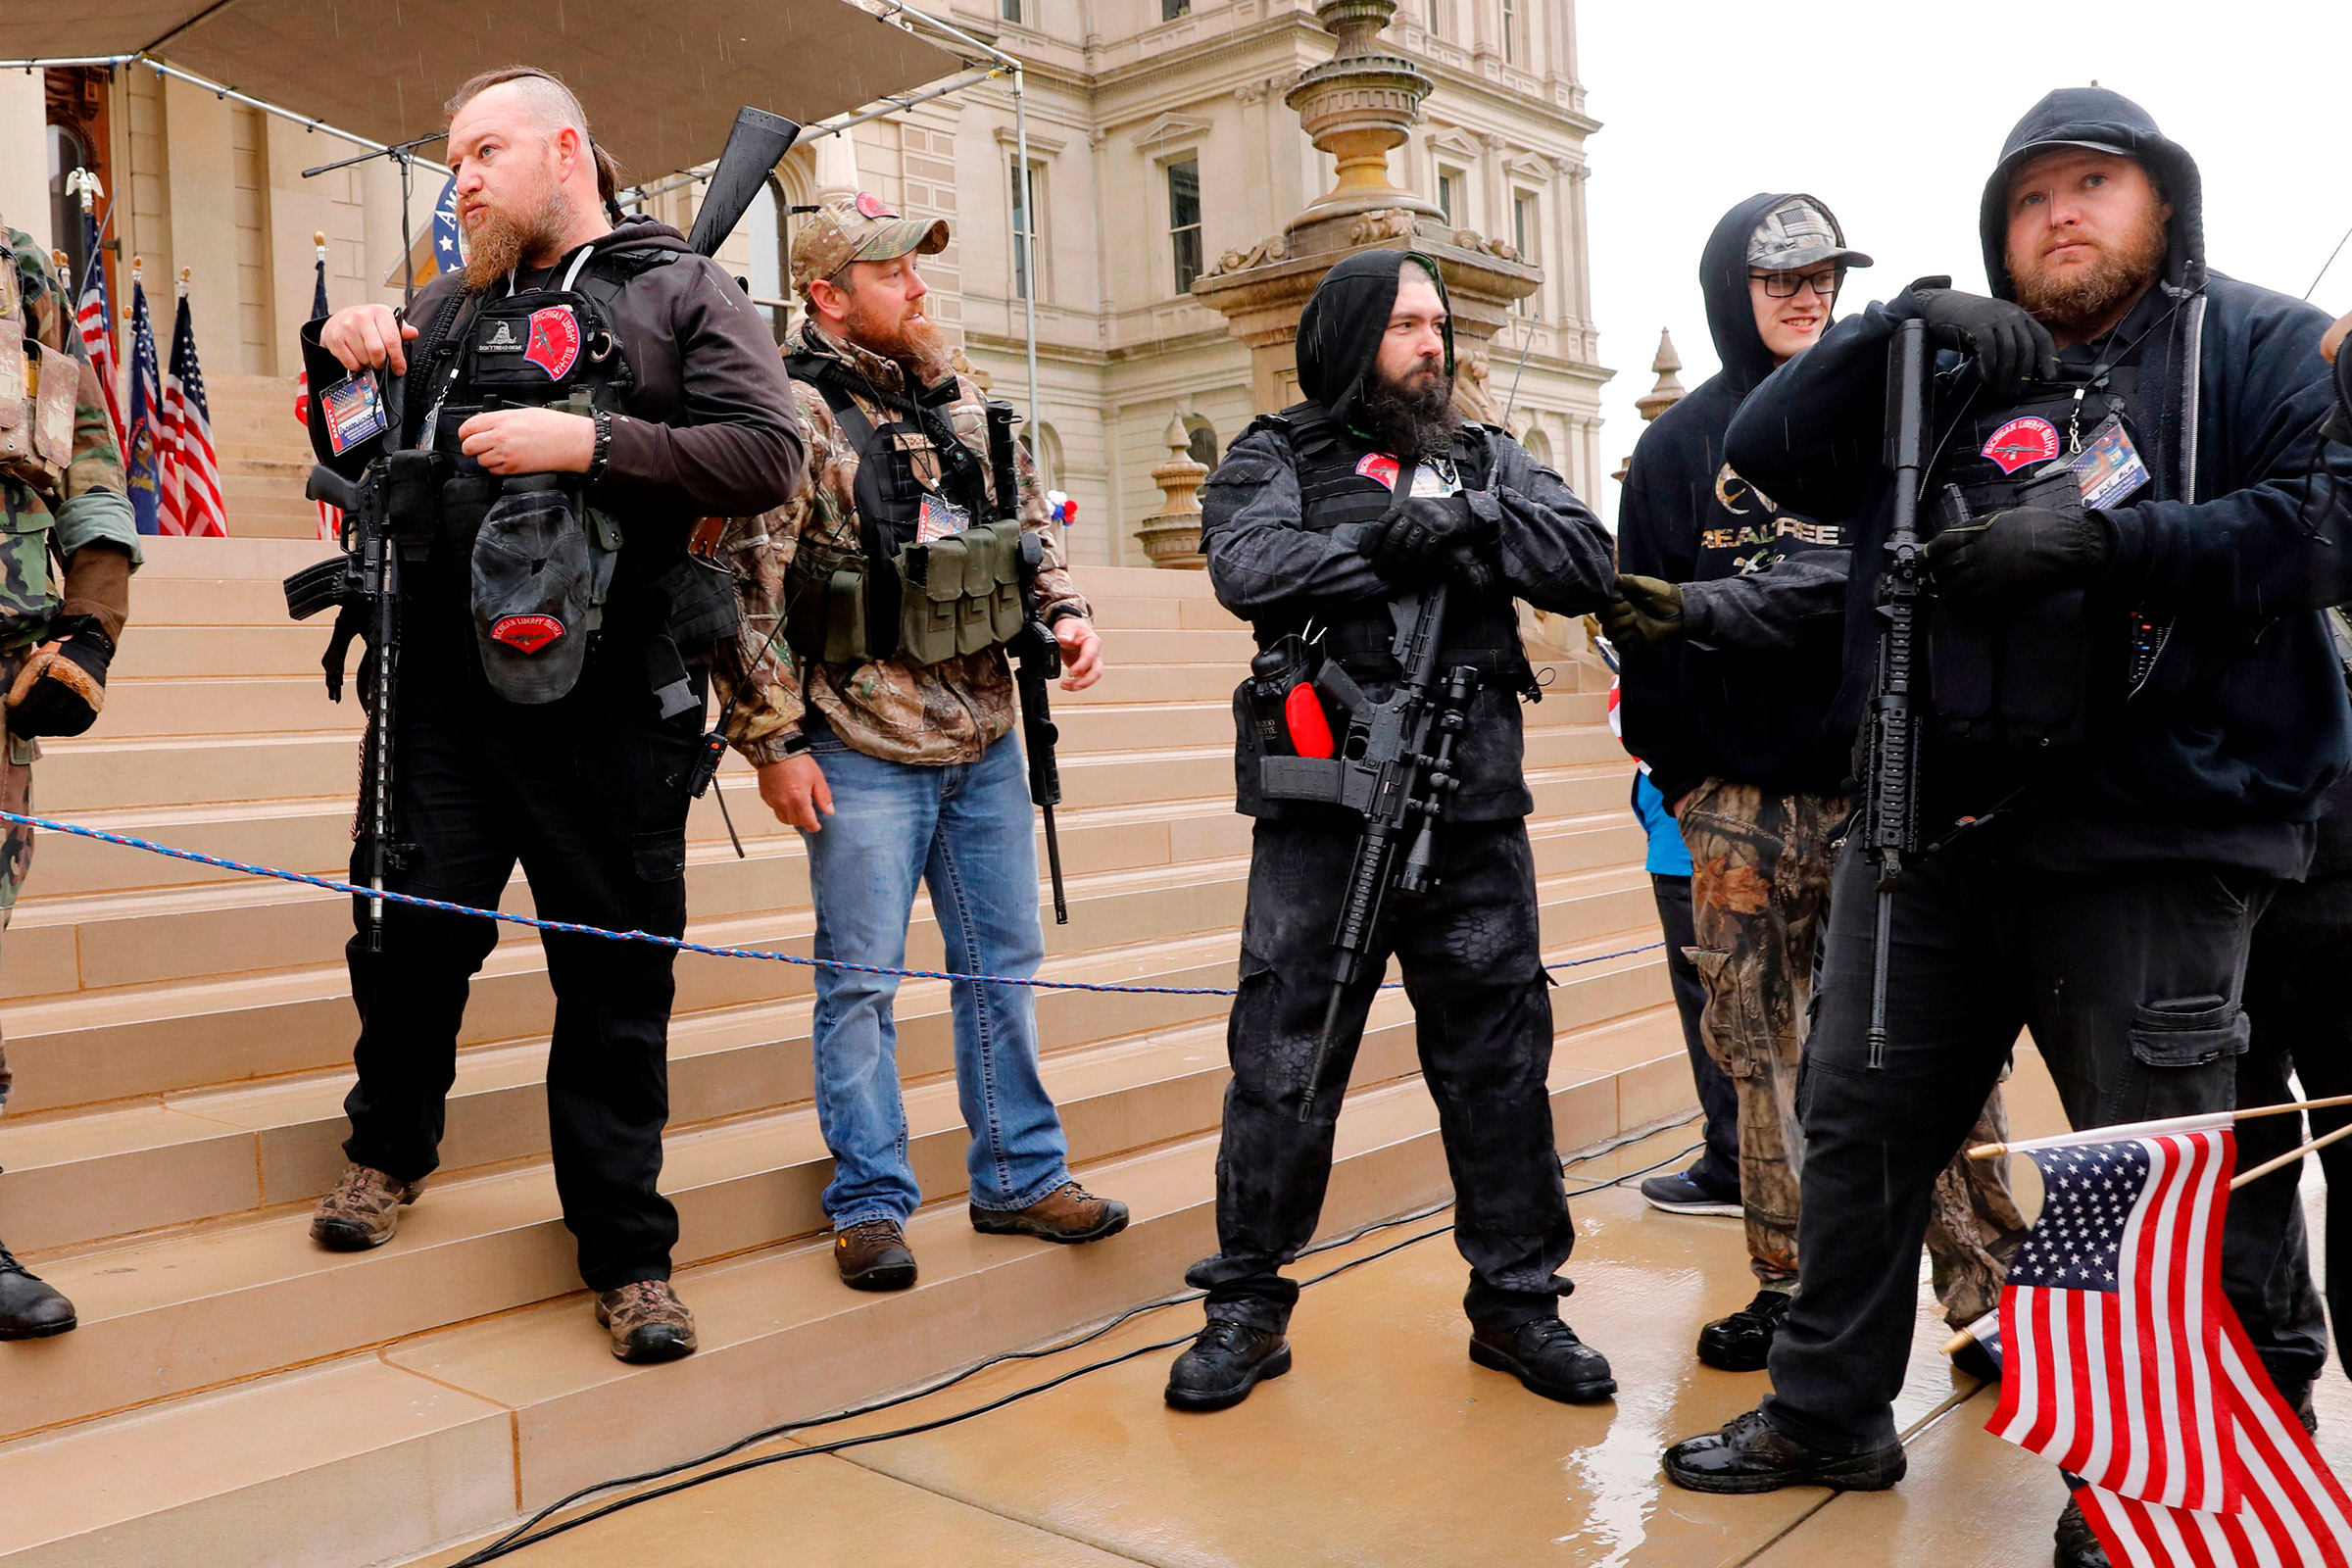 Michael Null (R) and William Null (L) arrive at the American Patriot Rally, to demand the reopening of businesses on the steps of the Michigan State Capitol in Lansing, Mich., on April 30, 2020. Thirteen men, including members of two right-wing militias, have been arrested for plotting to kidnap Michigan Gov. Gretchen Whitmer and 